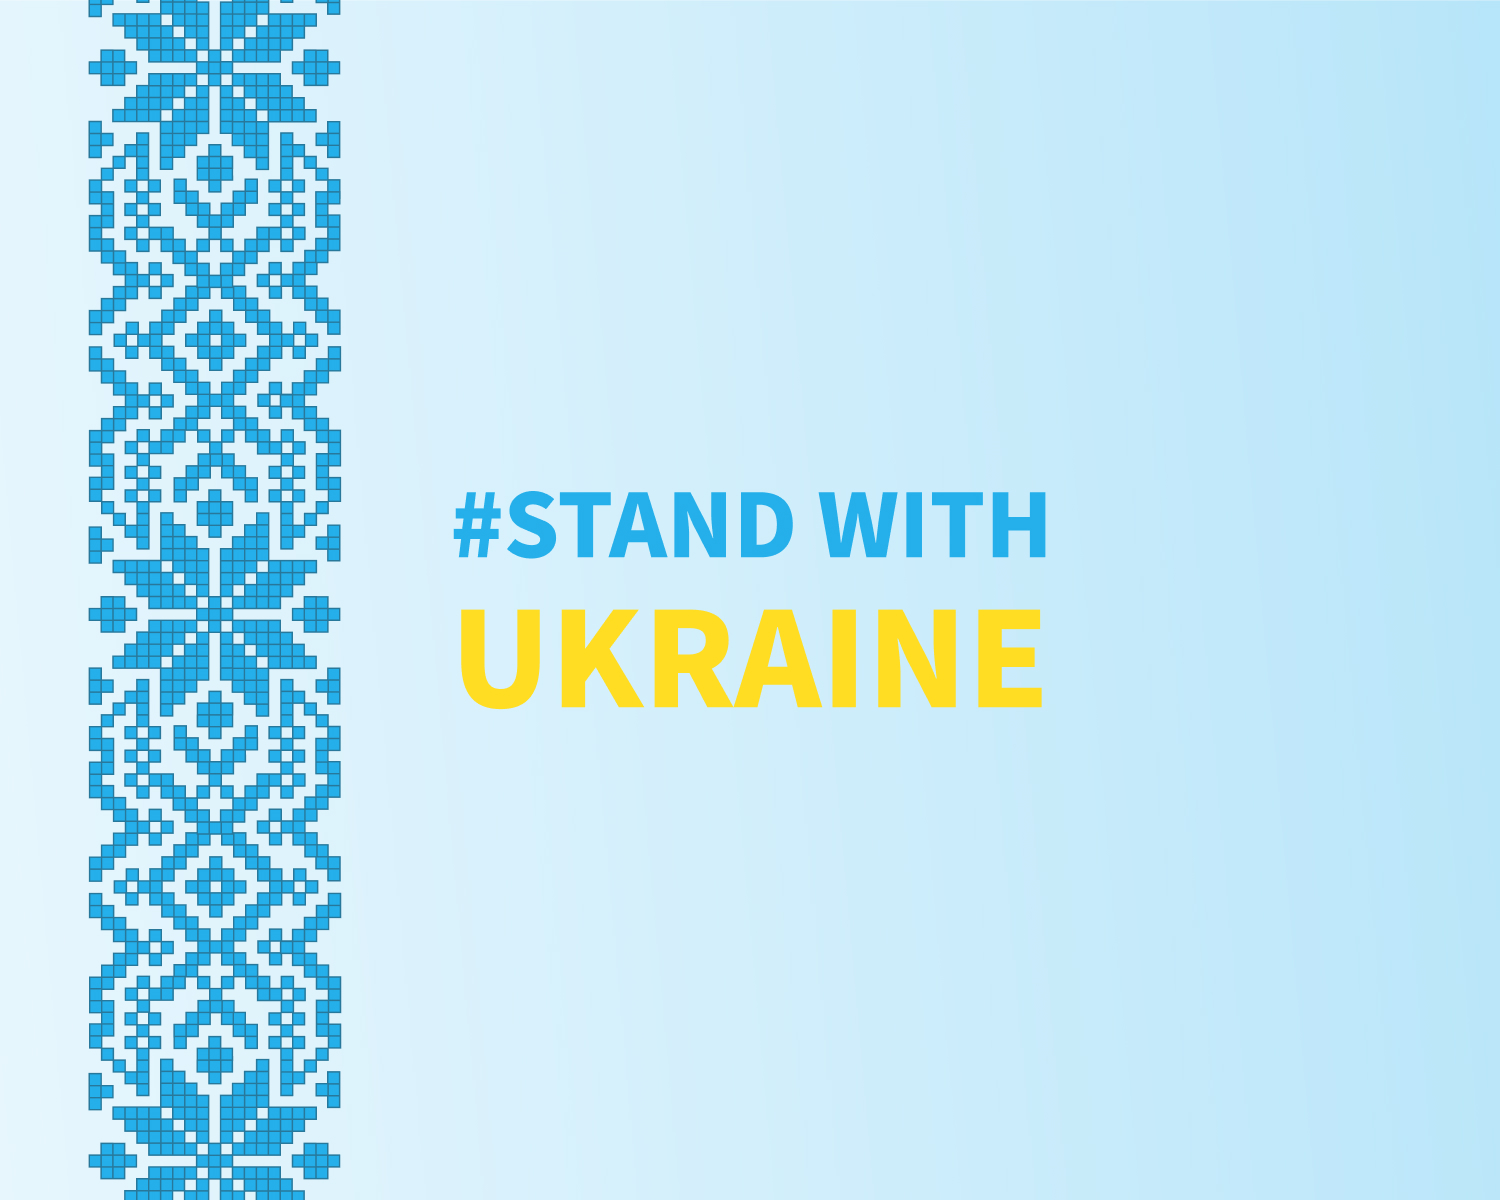 Stop war: United as never before for Ukraine